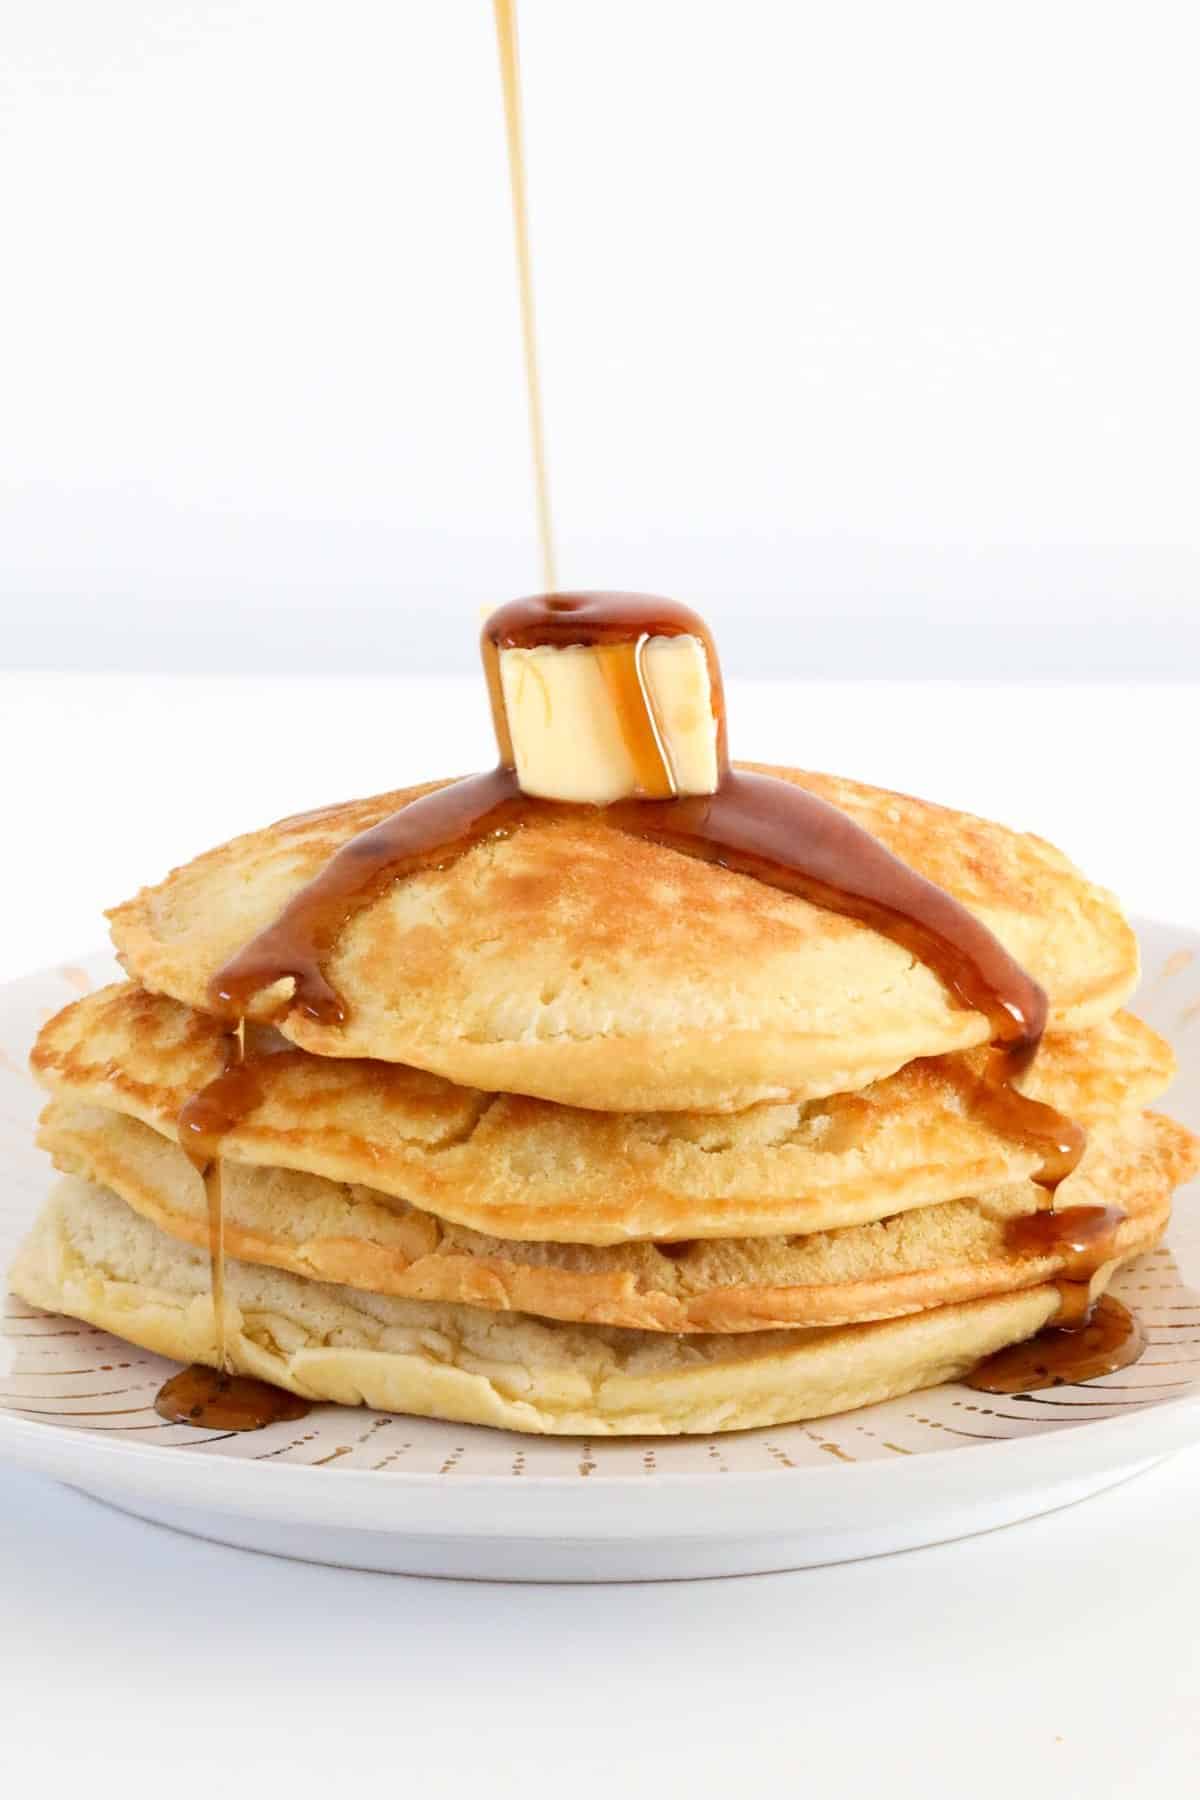 Maple syrup being poured onto pancakes.